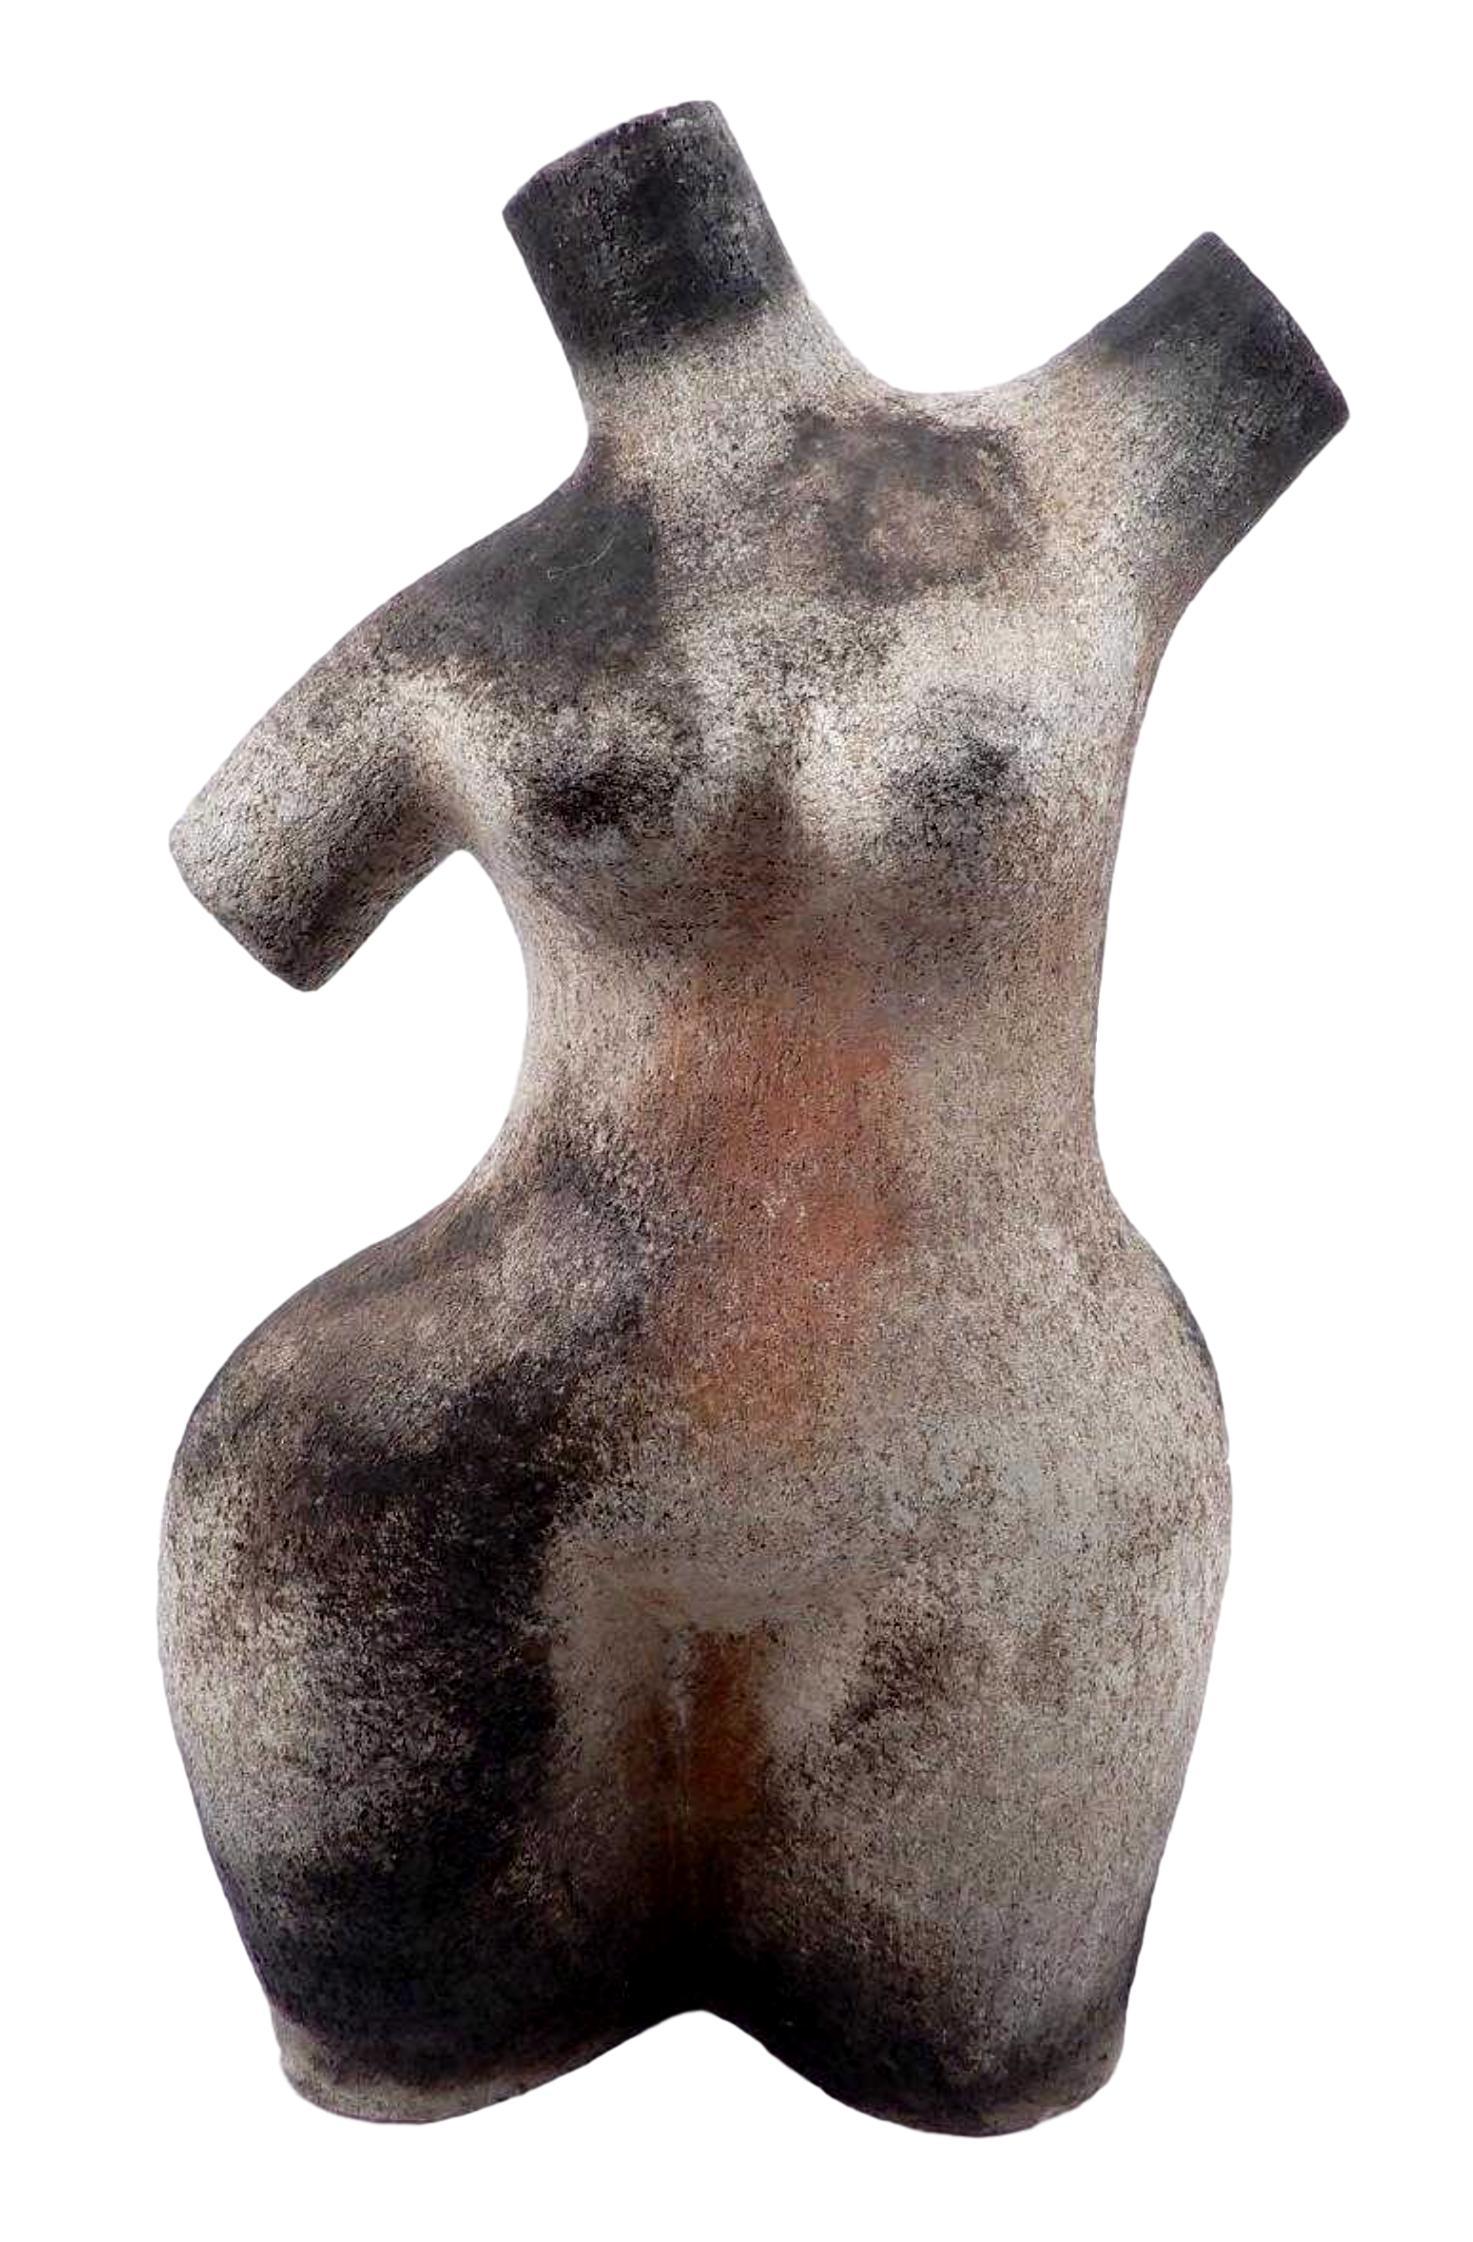 Stunning female torso sculpture with great coloring. Raku pottery is created by a low-firing process of removing pottery from the kiln while at bright red heat and placing into a container with combustible materials. These materials ignite and